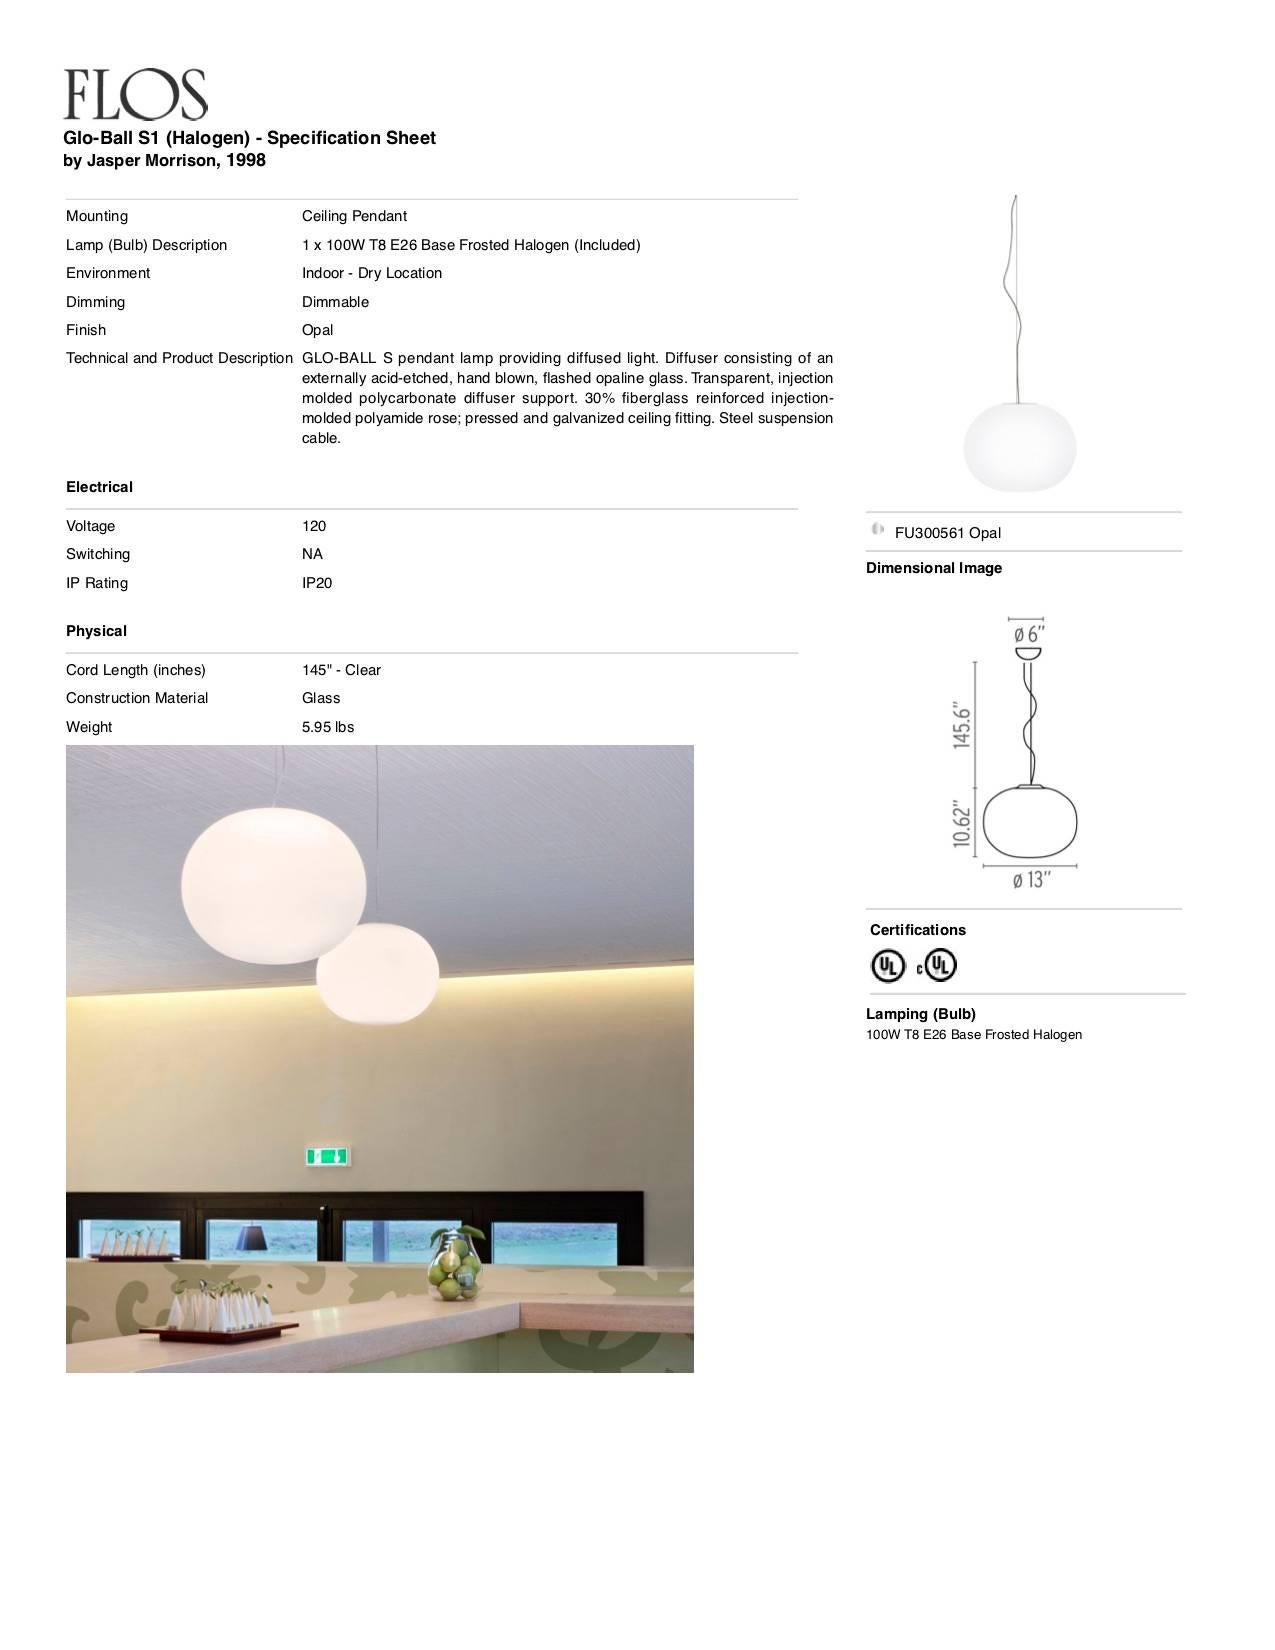 Jasper Morrison Modern Sphere Glass Stainless Steel S1 Pendant Lamp for FLOS In New Condition For Sale In Brooklyn, NY